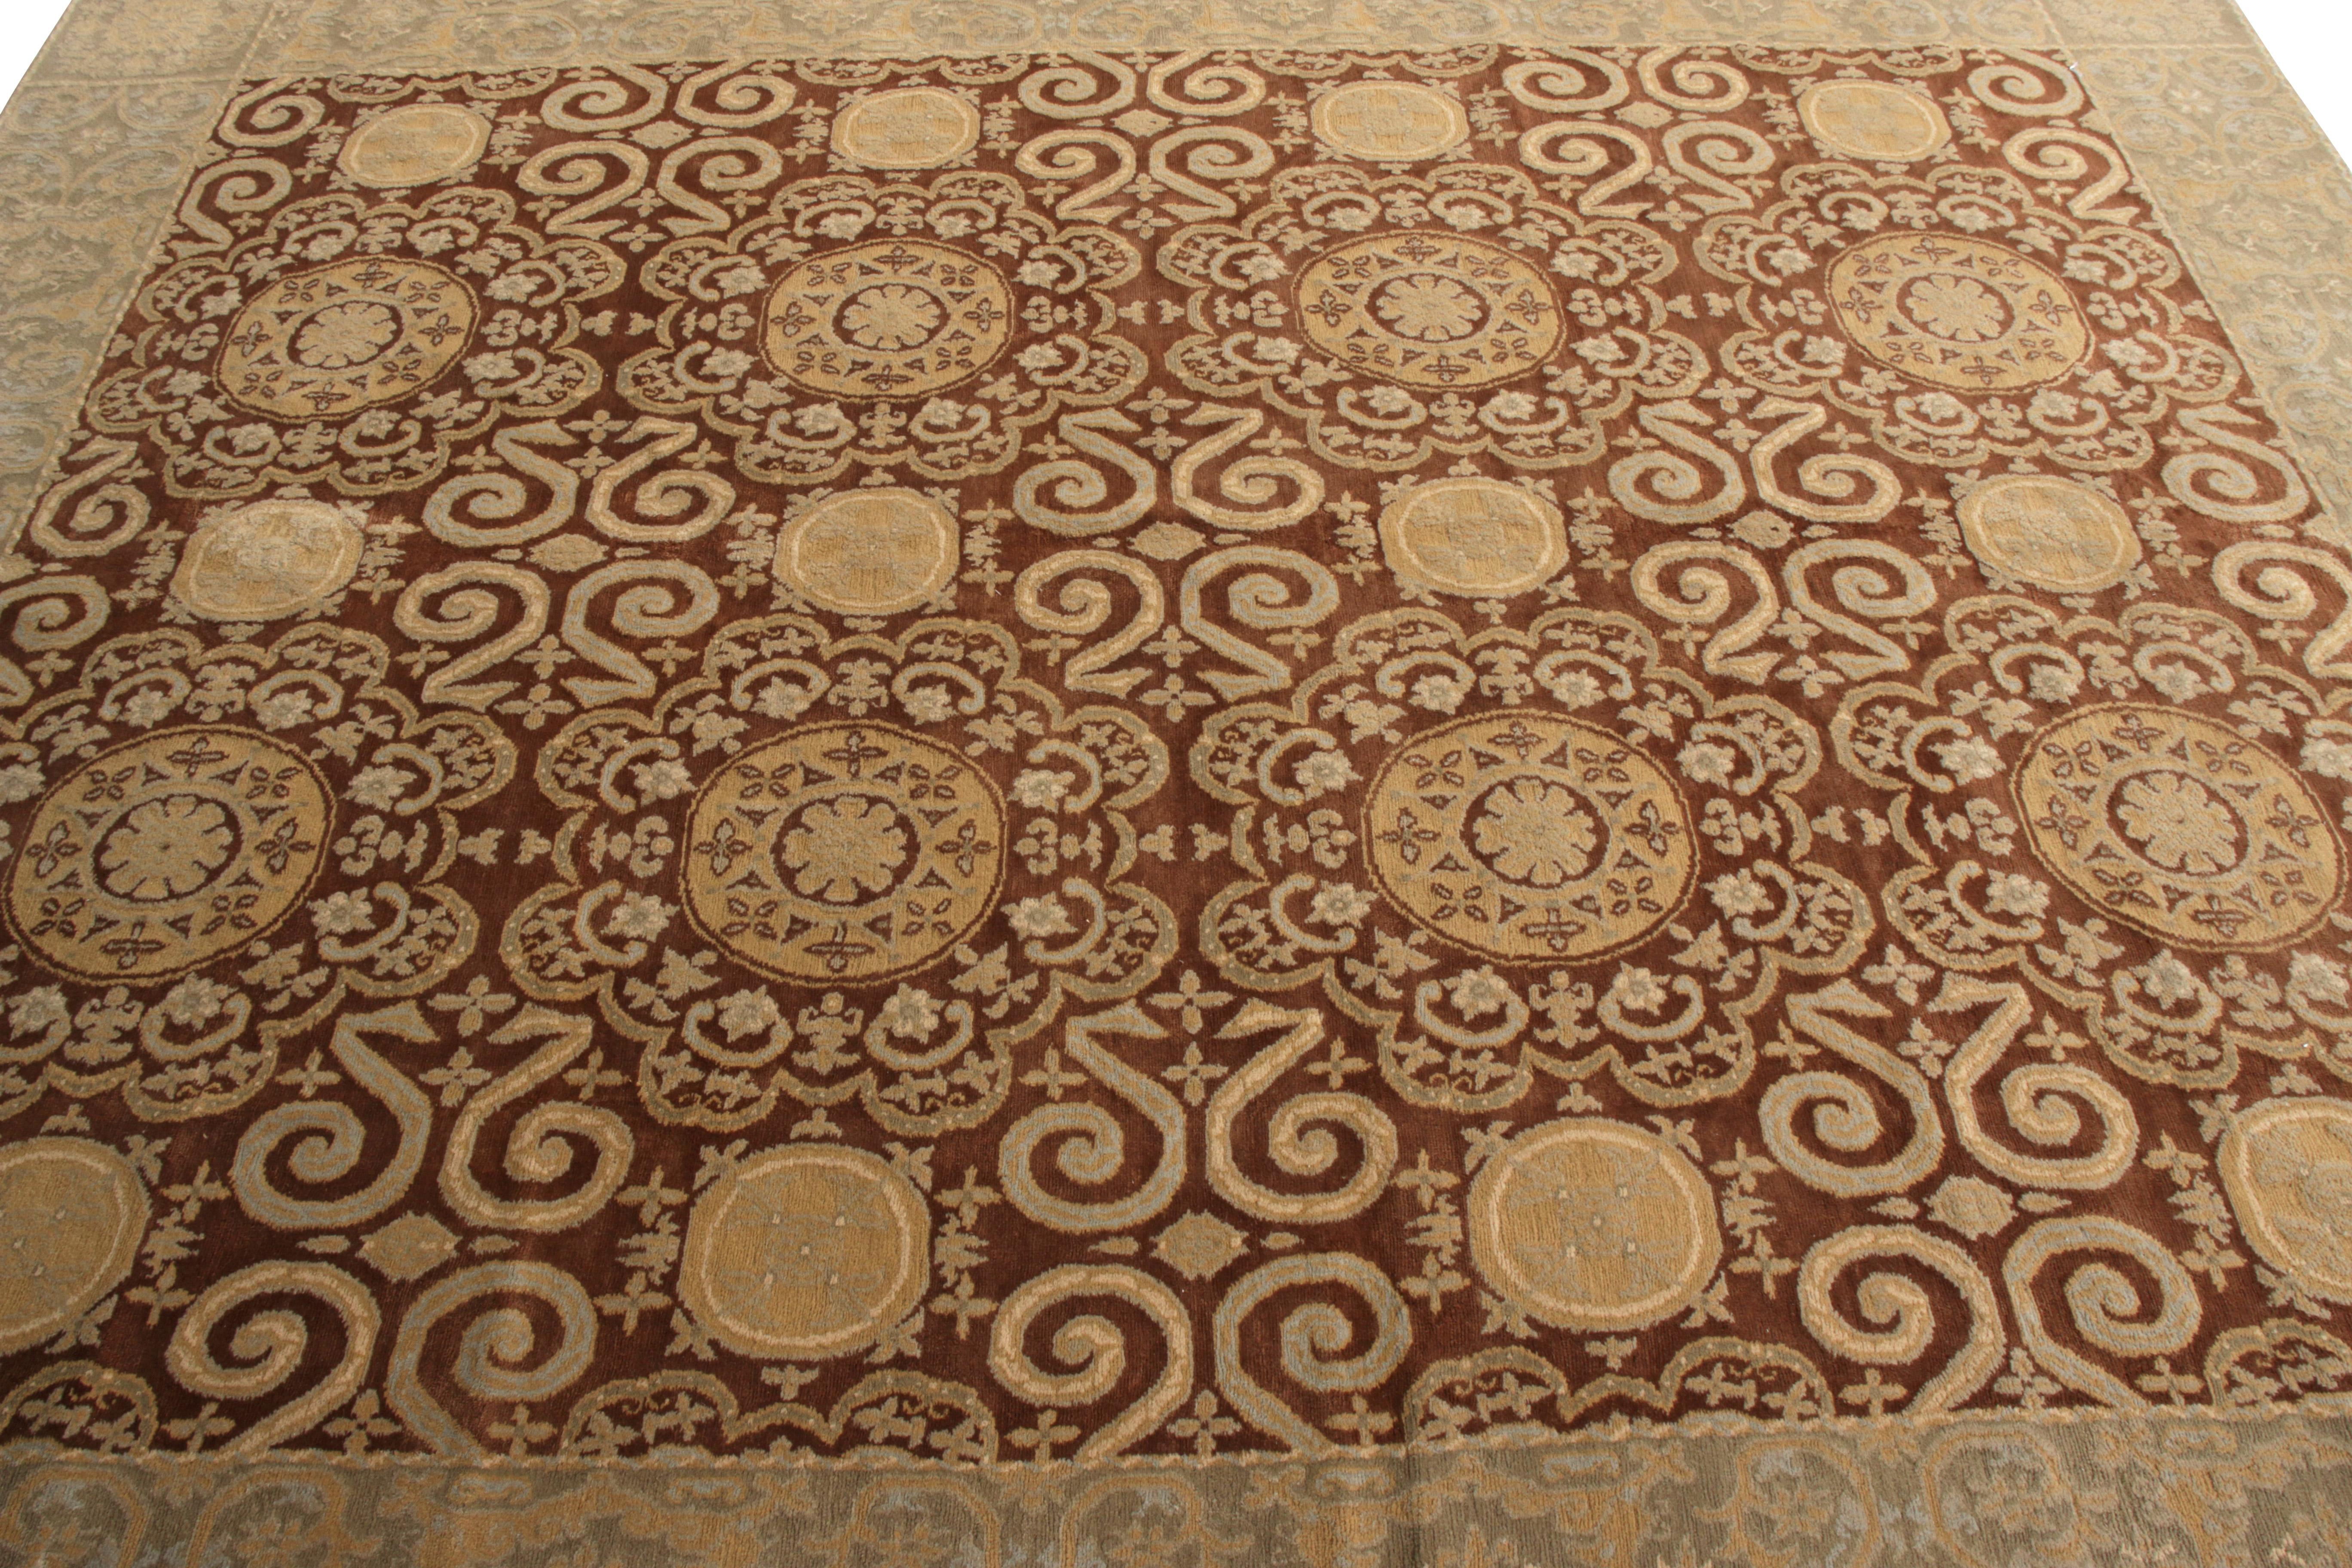 Nepalese Rug & Kilim’s European Style Rug in Beige-Brown and Blue All Over Pattern For Sale